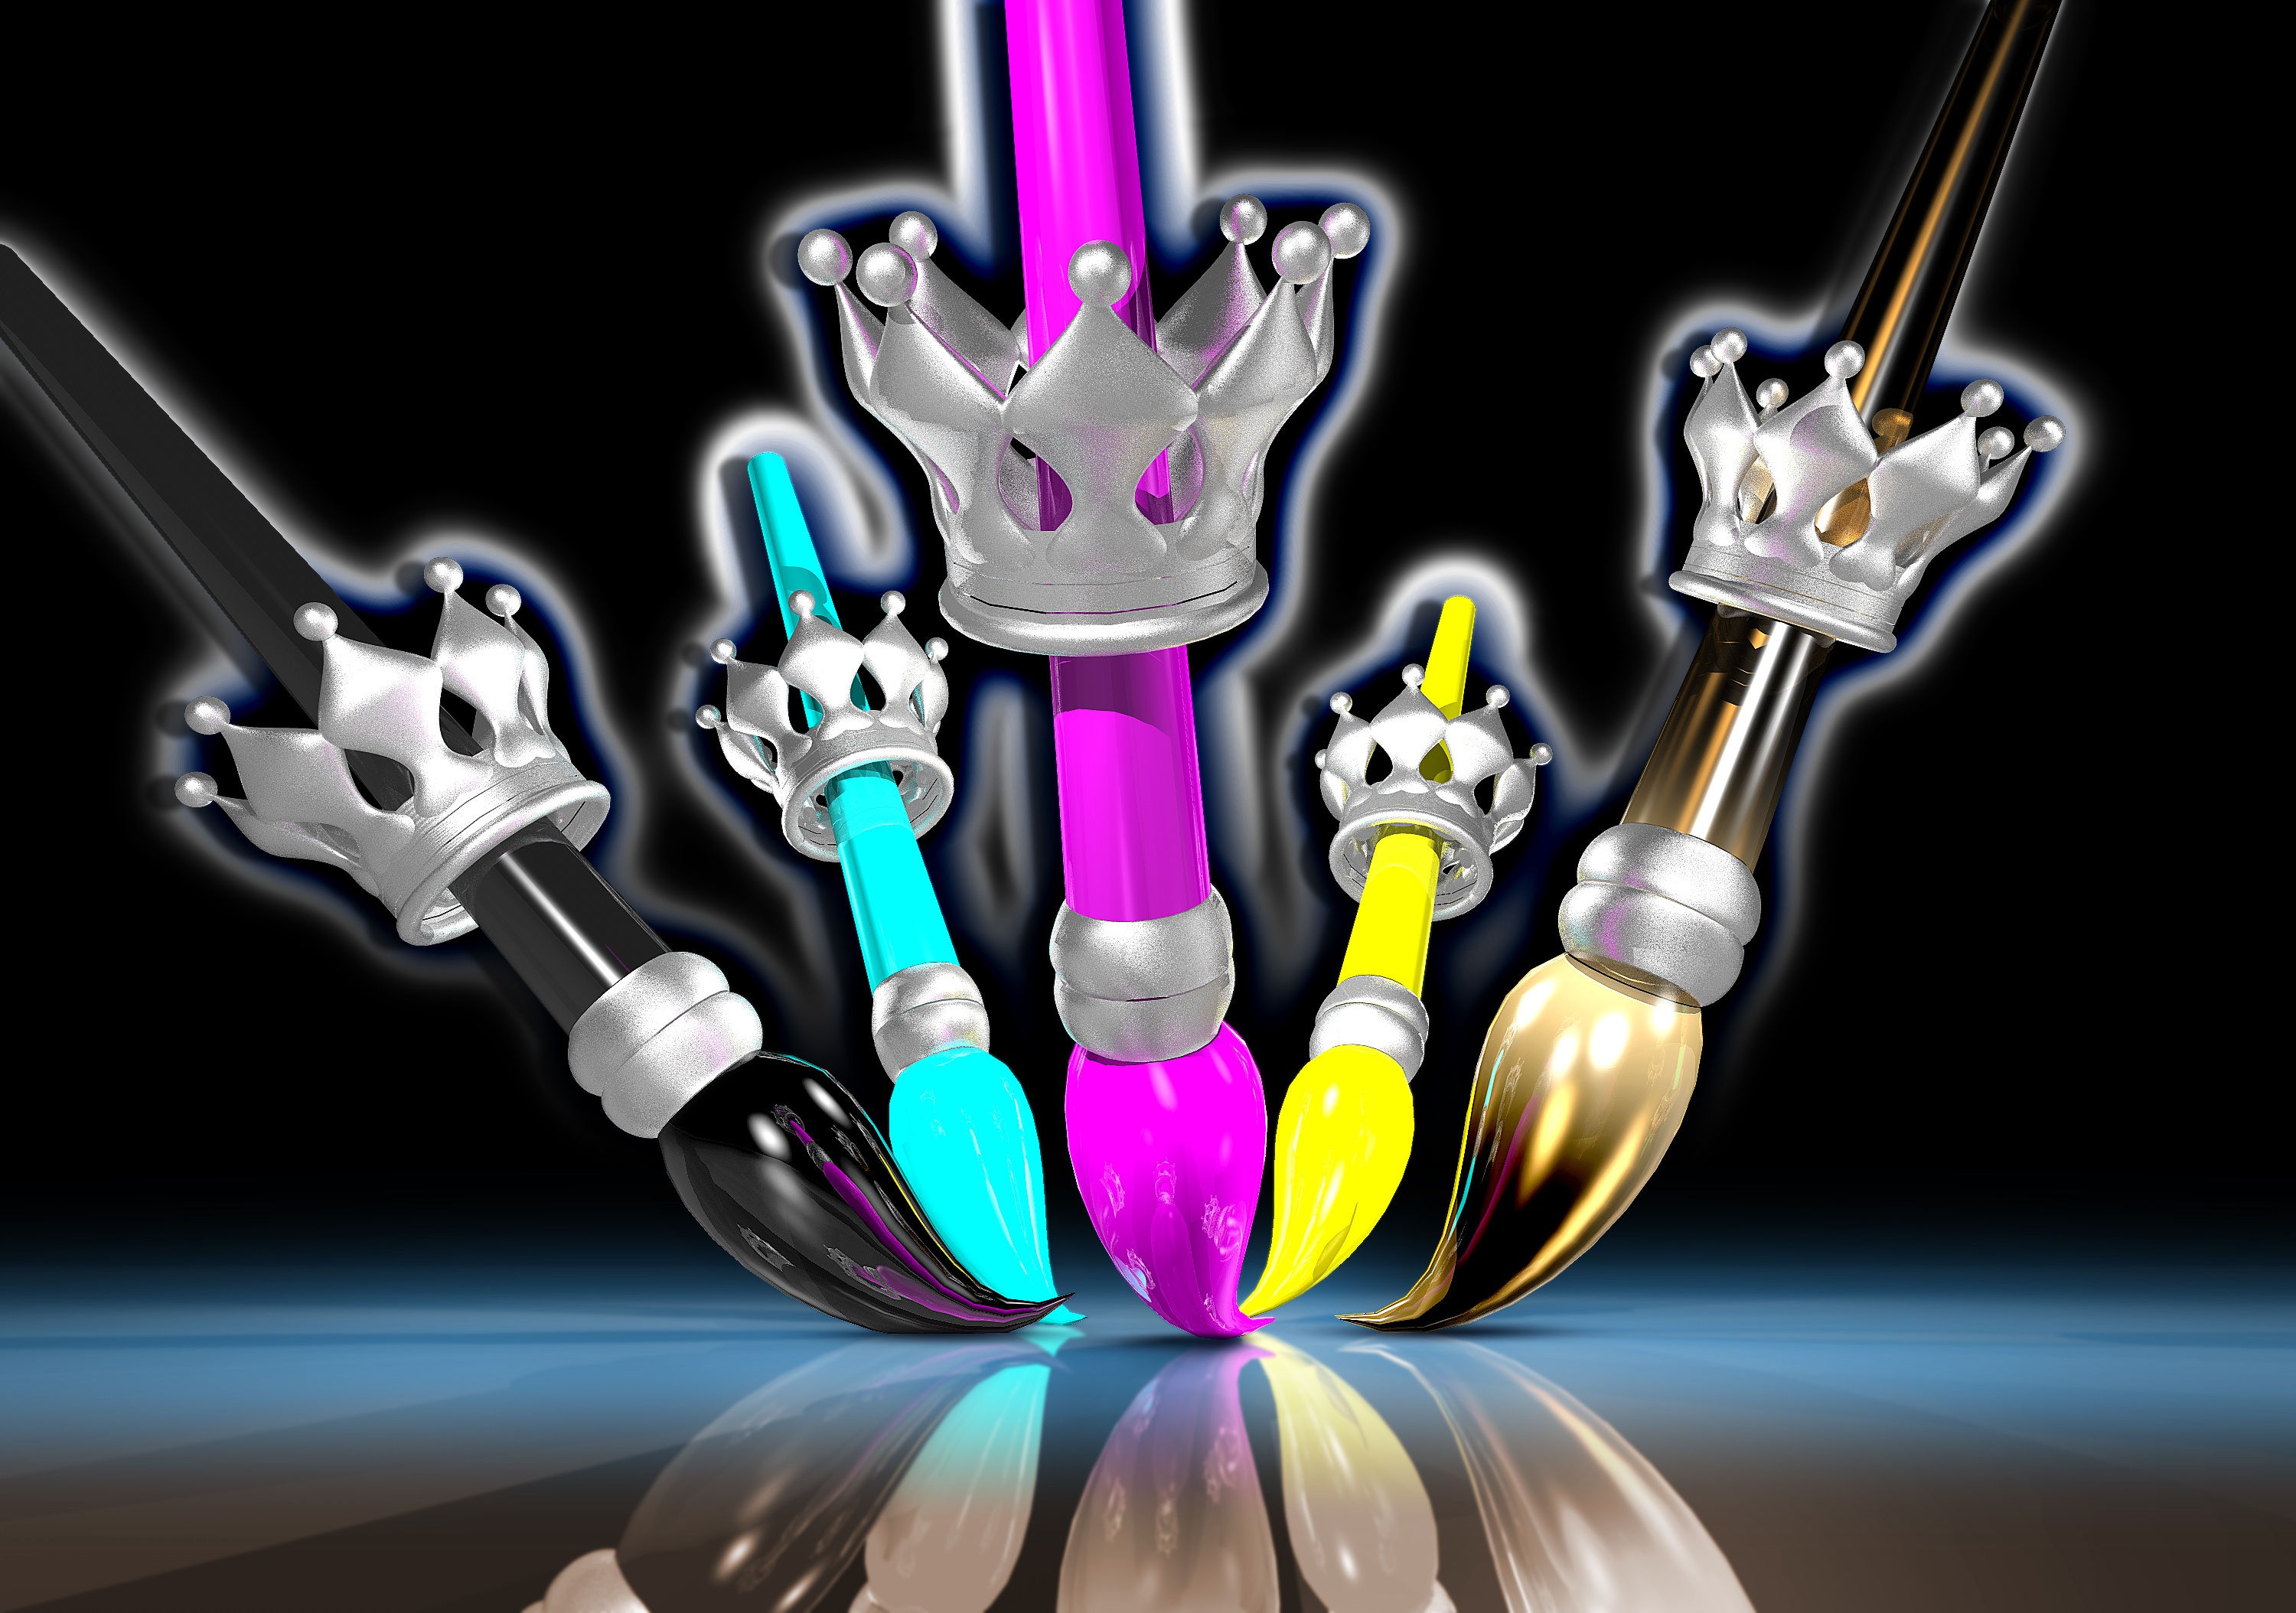 3d, paint, multicolored, motley, crown, brush, brushes, crowns iphone wallpaper